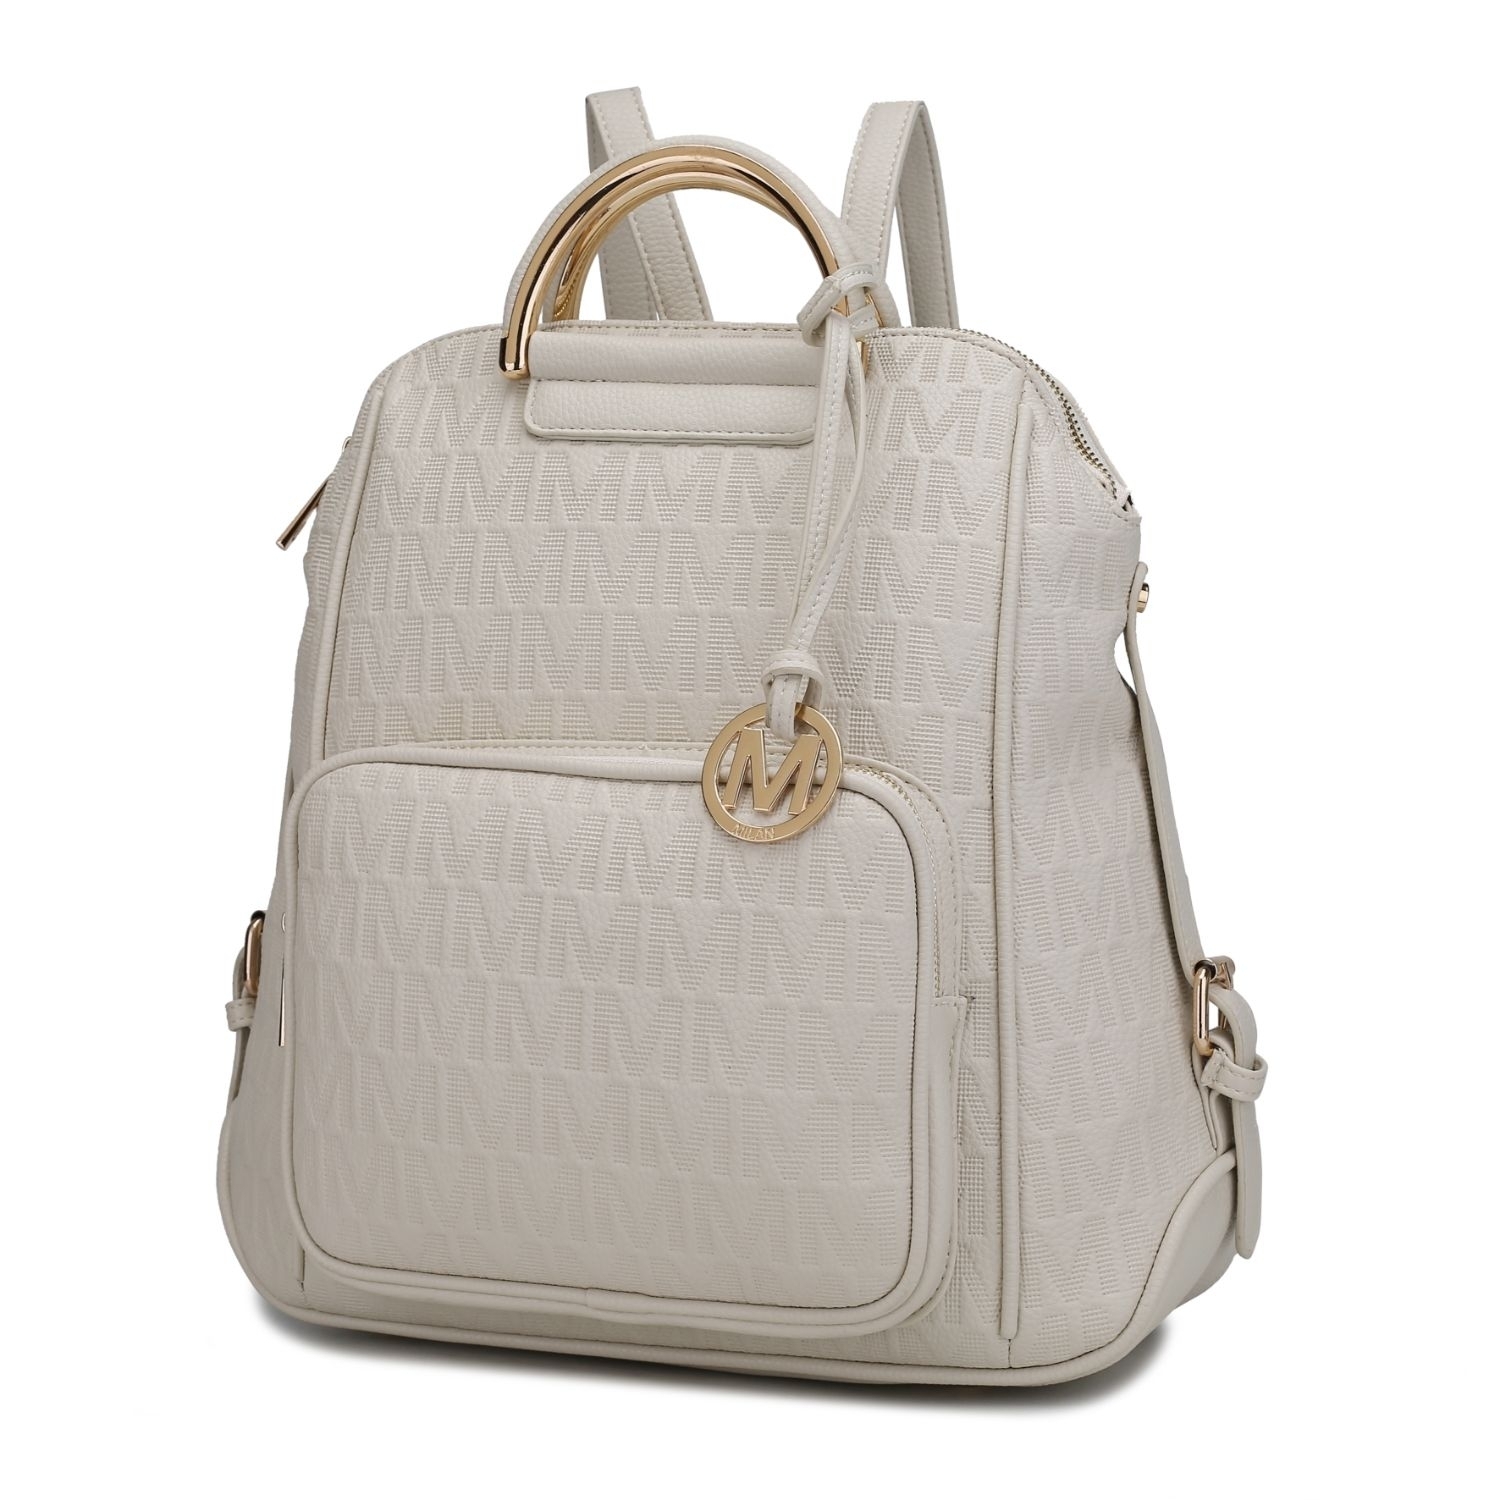 MKF Collection Torra Milan .M. Signature Trendy Backpack By Mia K. - Tan